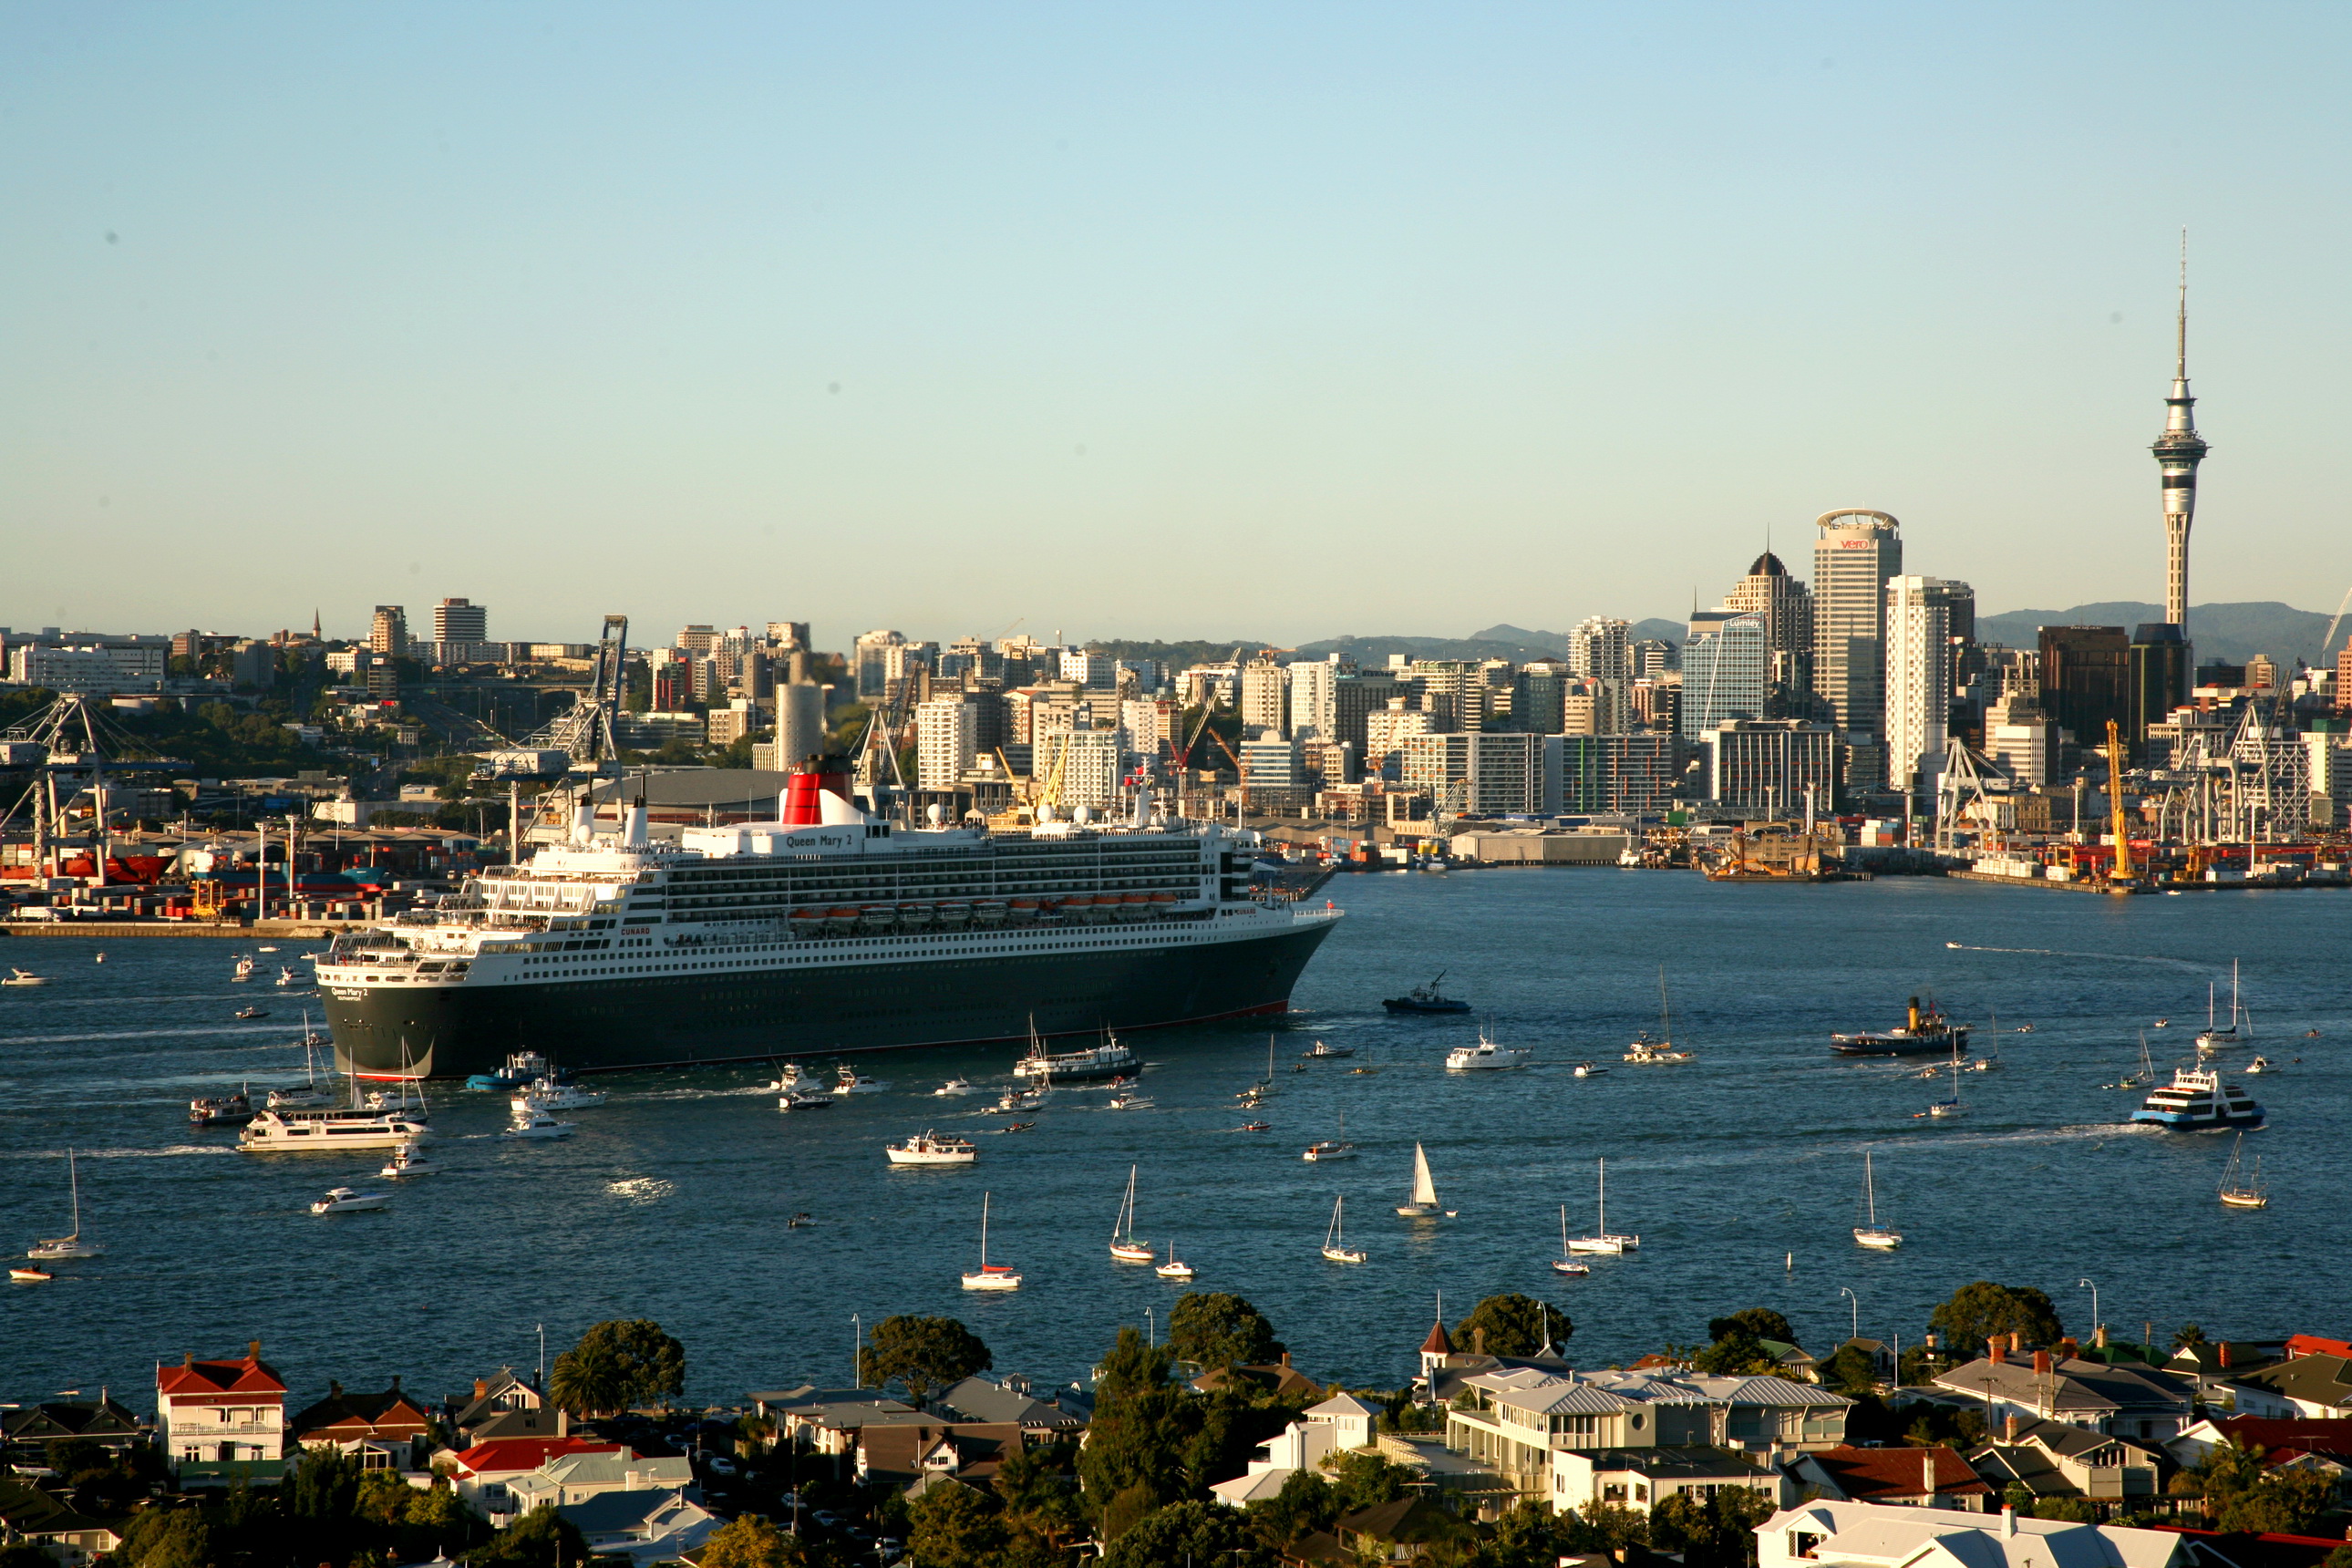 new zealand, vehicles, rms queen mary 2, auckland 32K